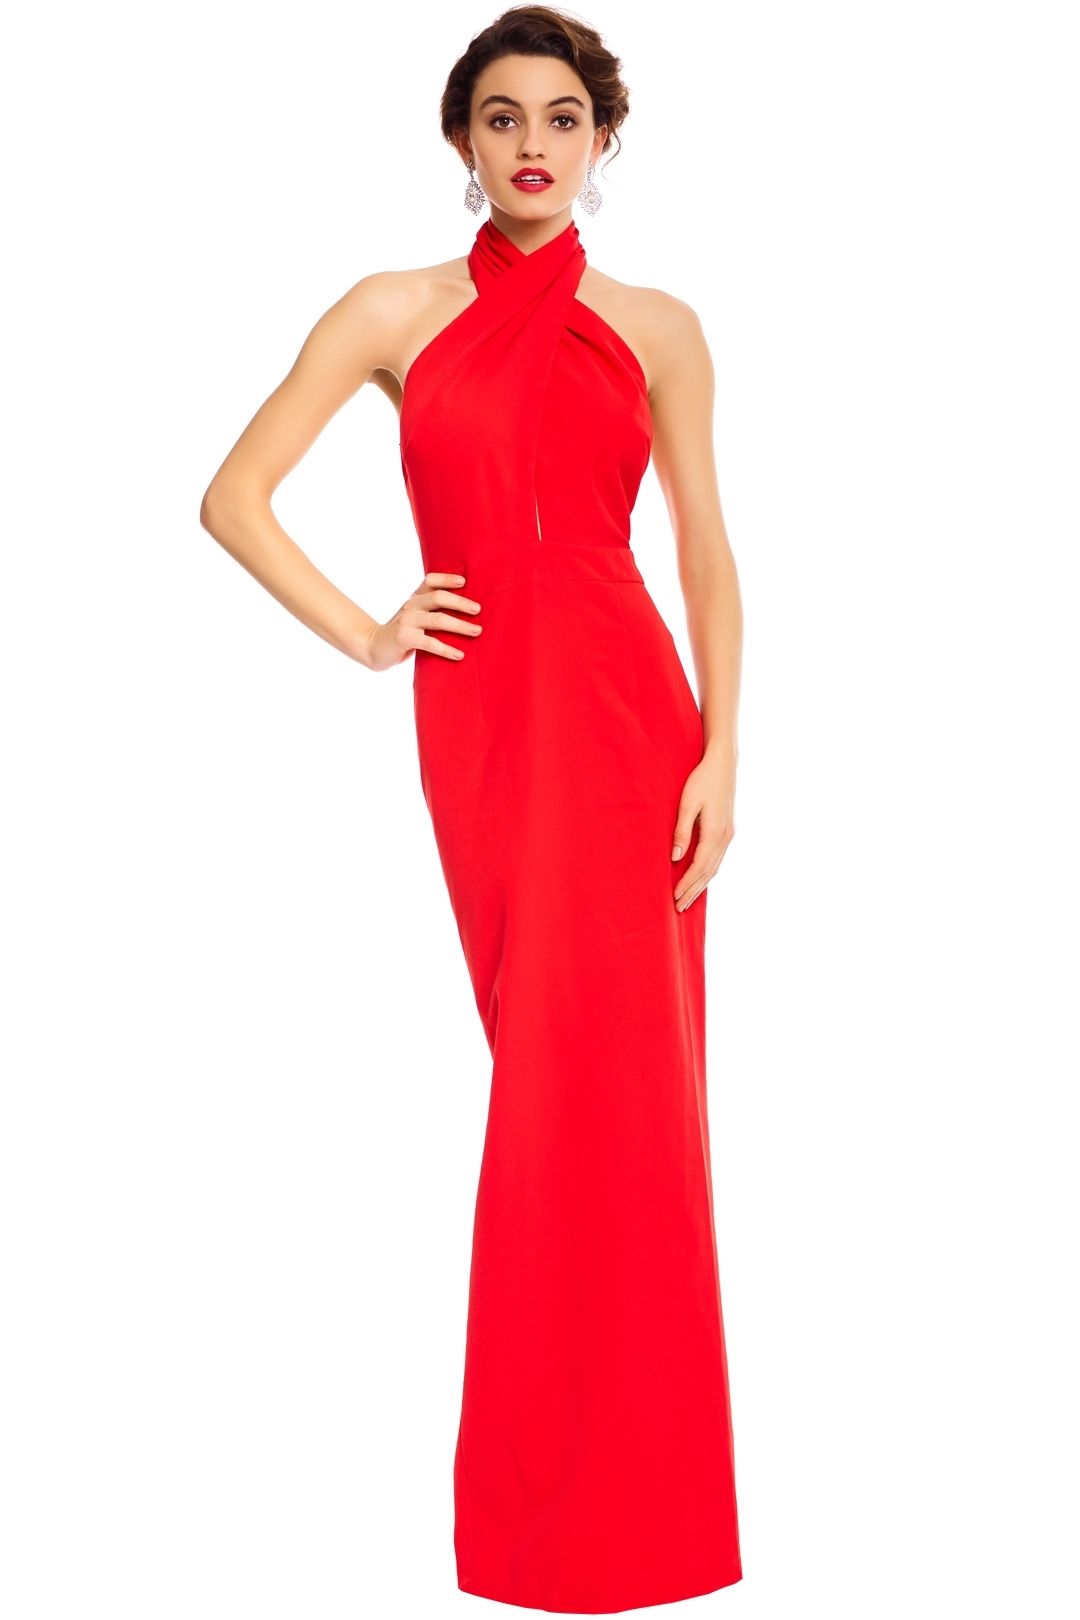 Elle Zeitoune - Winona Red Gown - Red - Front